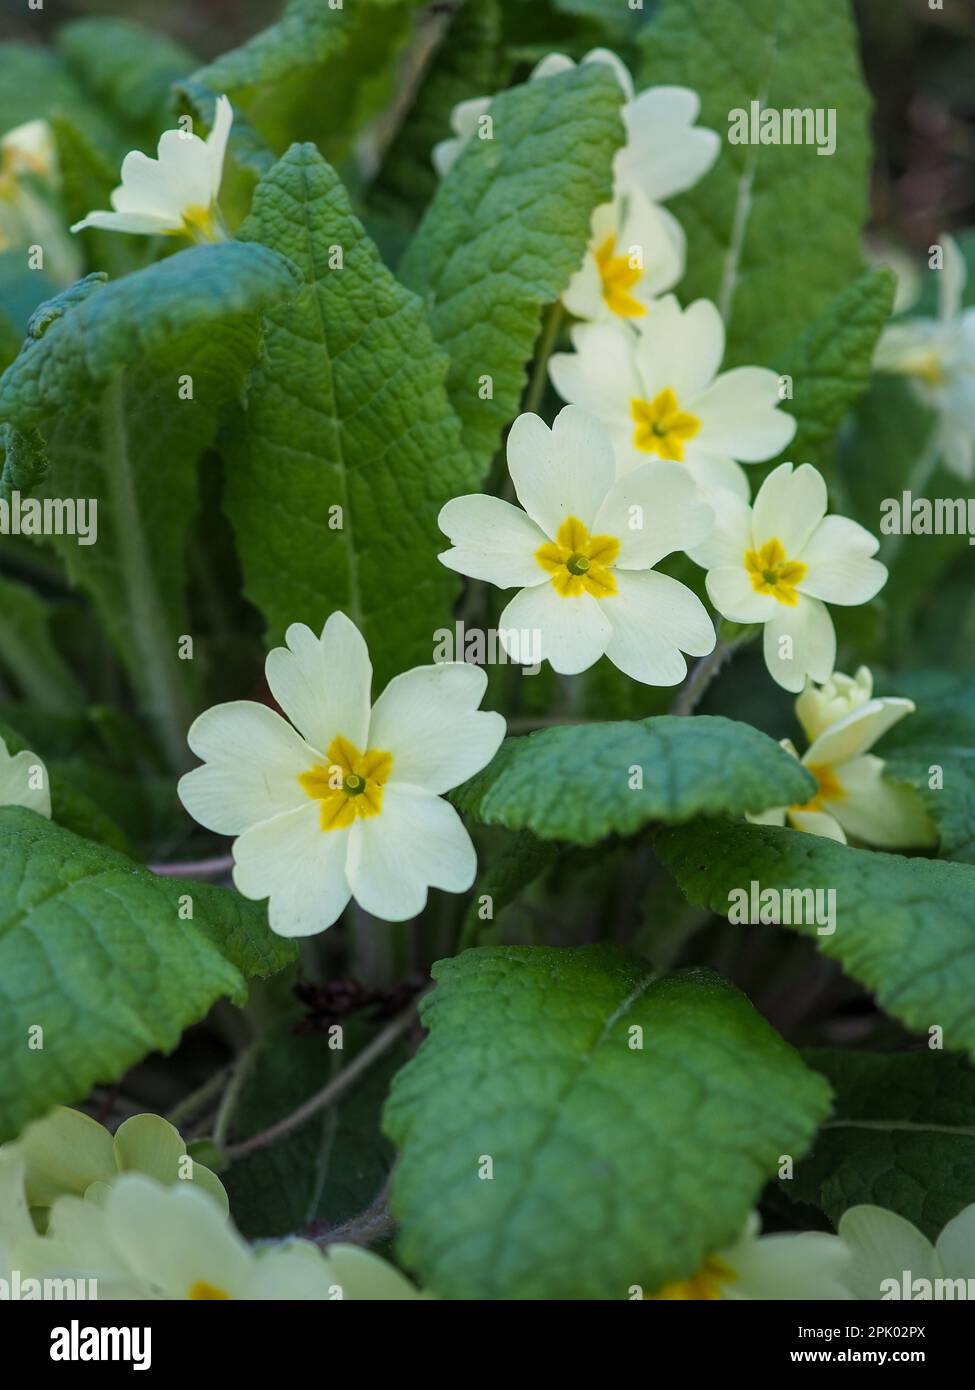 Close up of the flowers and leaves of perennial cream / yellow primroses (Primula vulgaris or English primrose) taken in spring in Britain Stock Photo